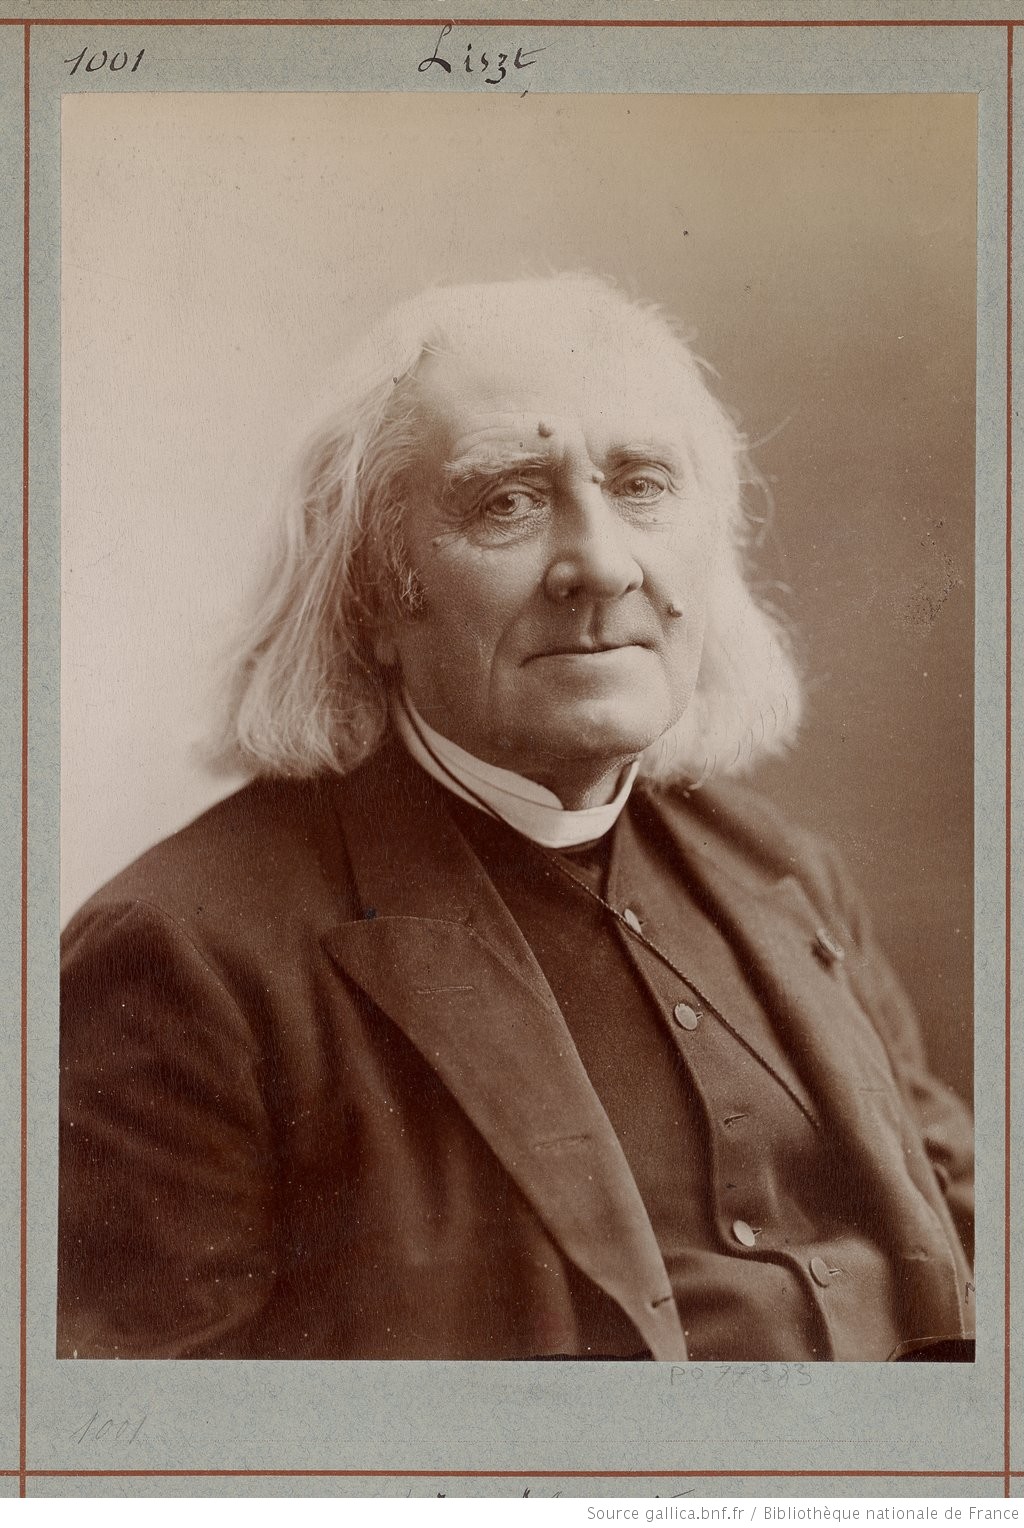 Liszt portrait number 9 in black and white taken by Nadar